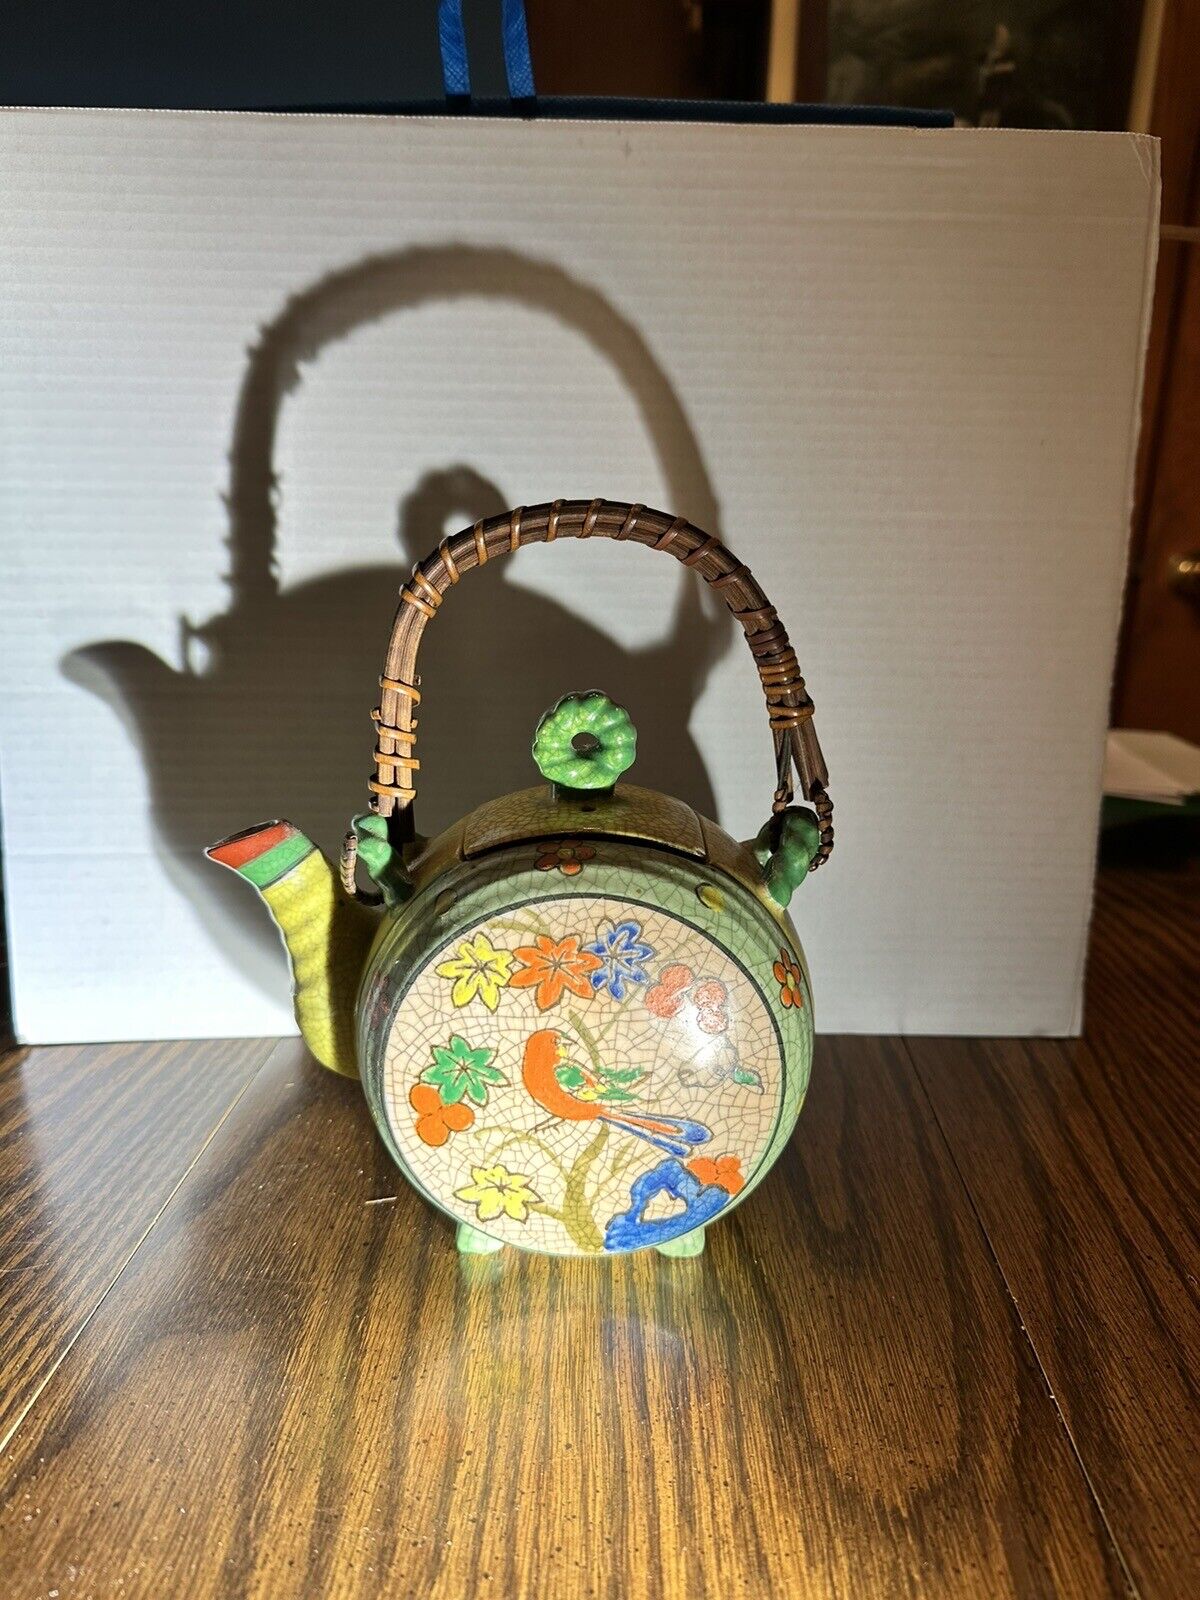 Vintage Japanese Teapot Hand Painted with Ratan Handle And Crackle Glaze